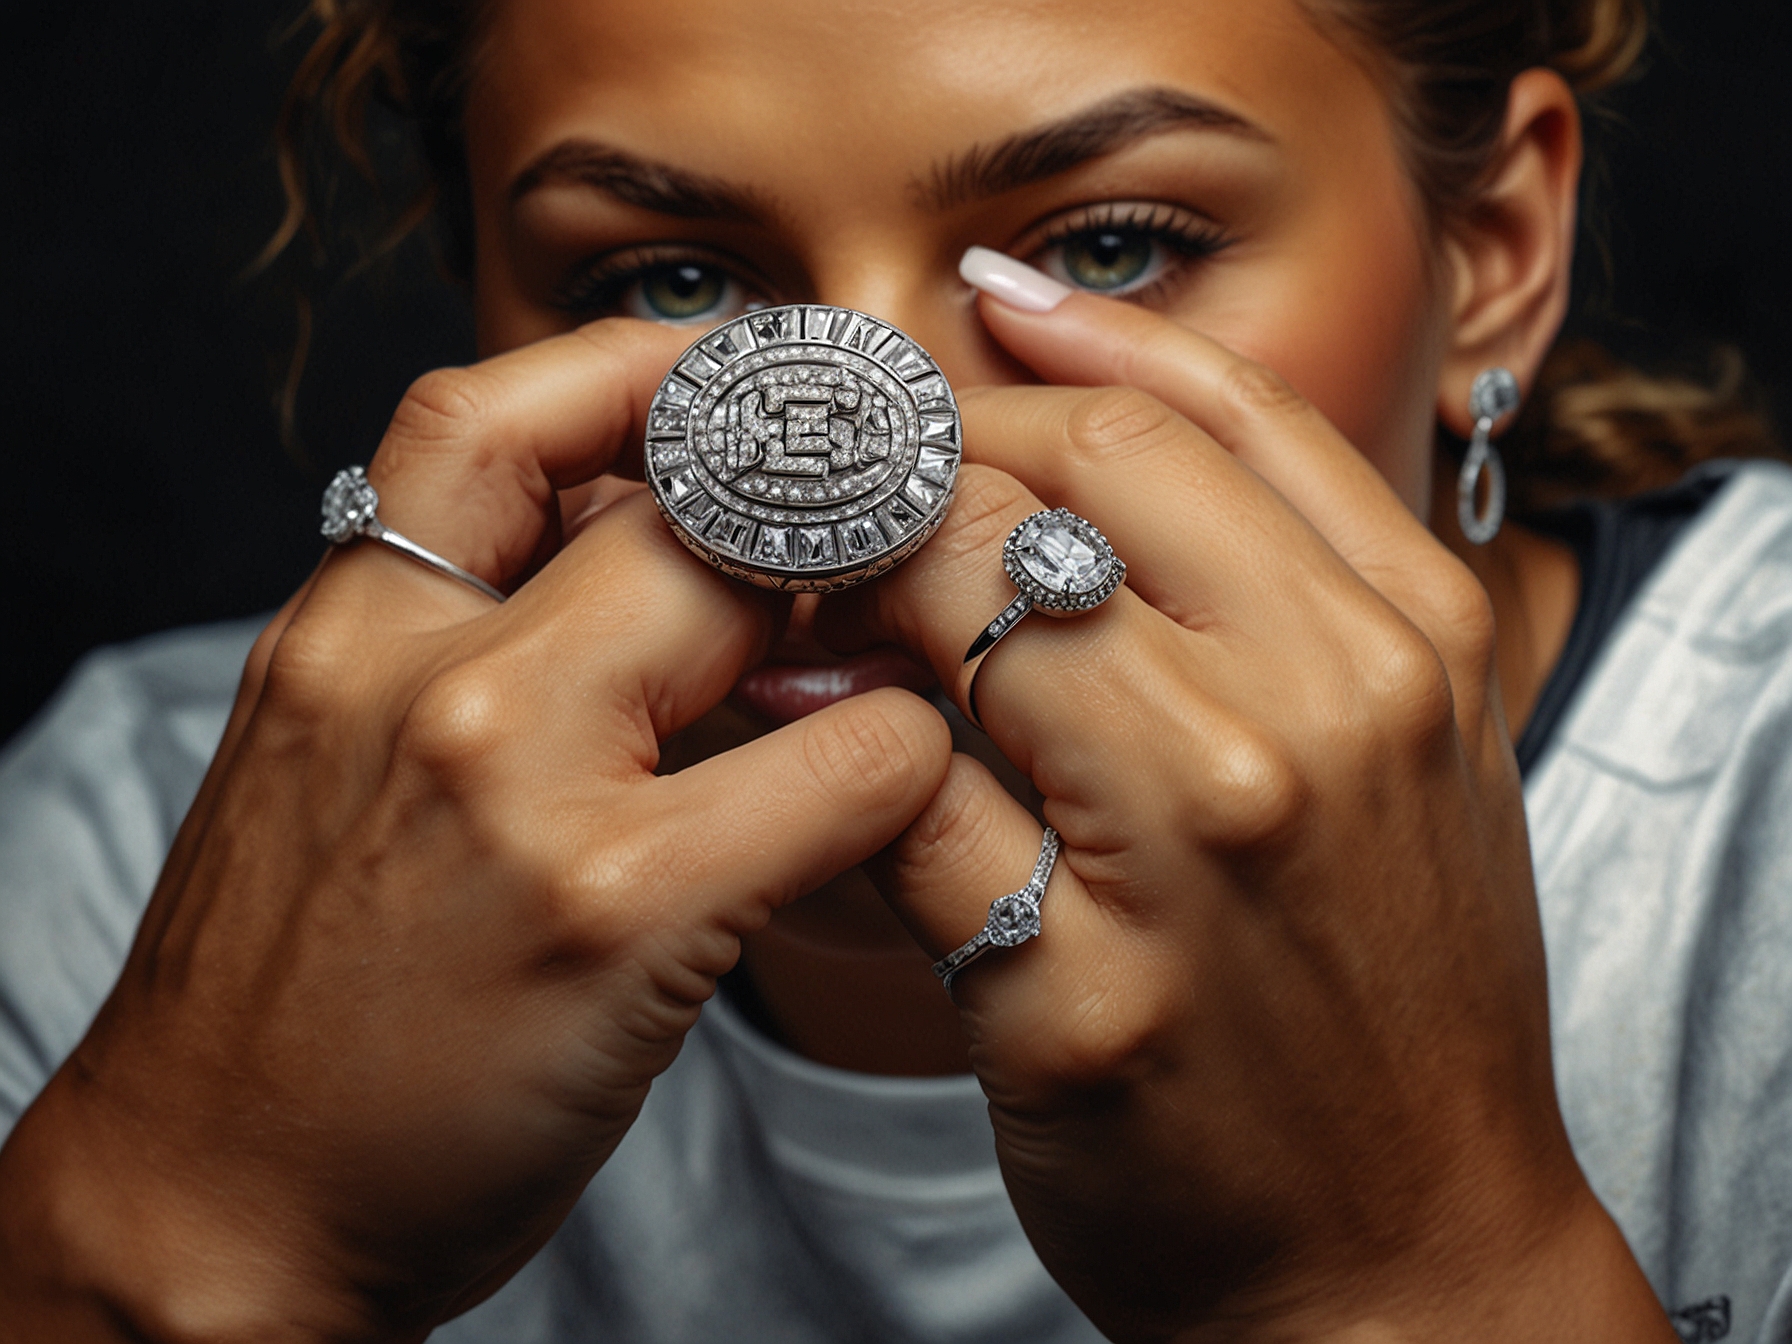 Brittany Mahomes captures a close-up of the Chiefs' Super Bowl rings, showcasing their intricate design and precious stones, symbolizing the team's hard work and achievement.